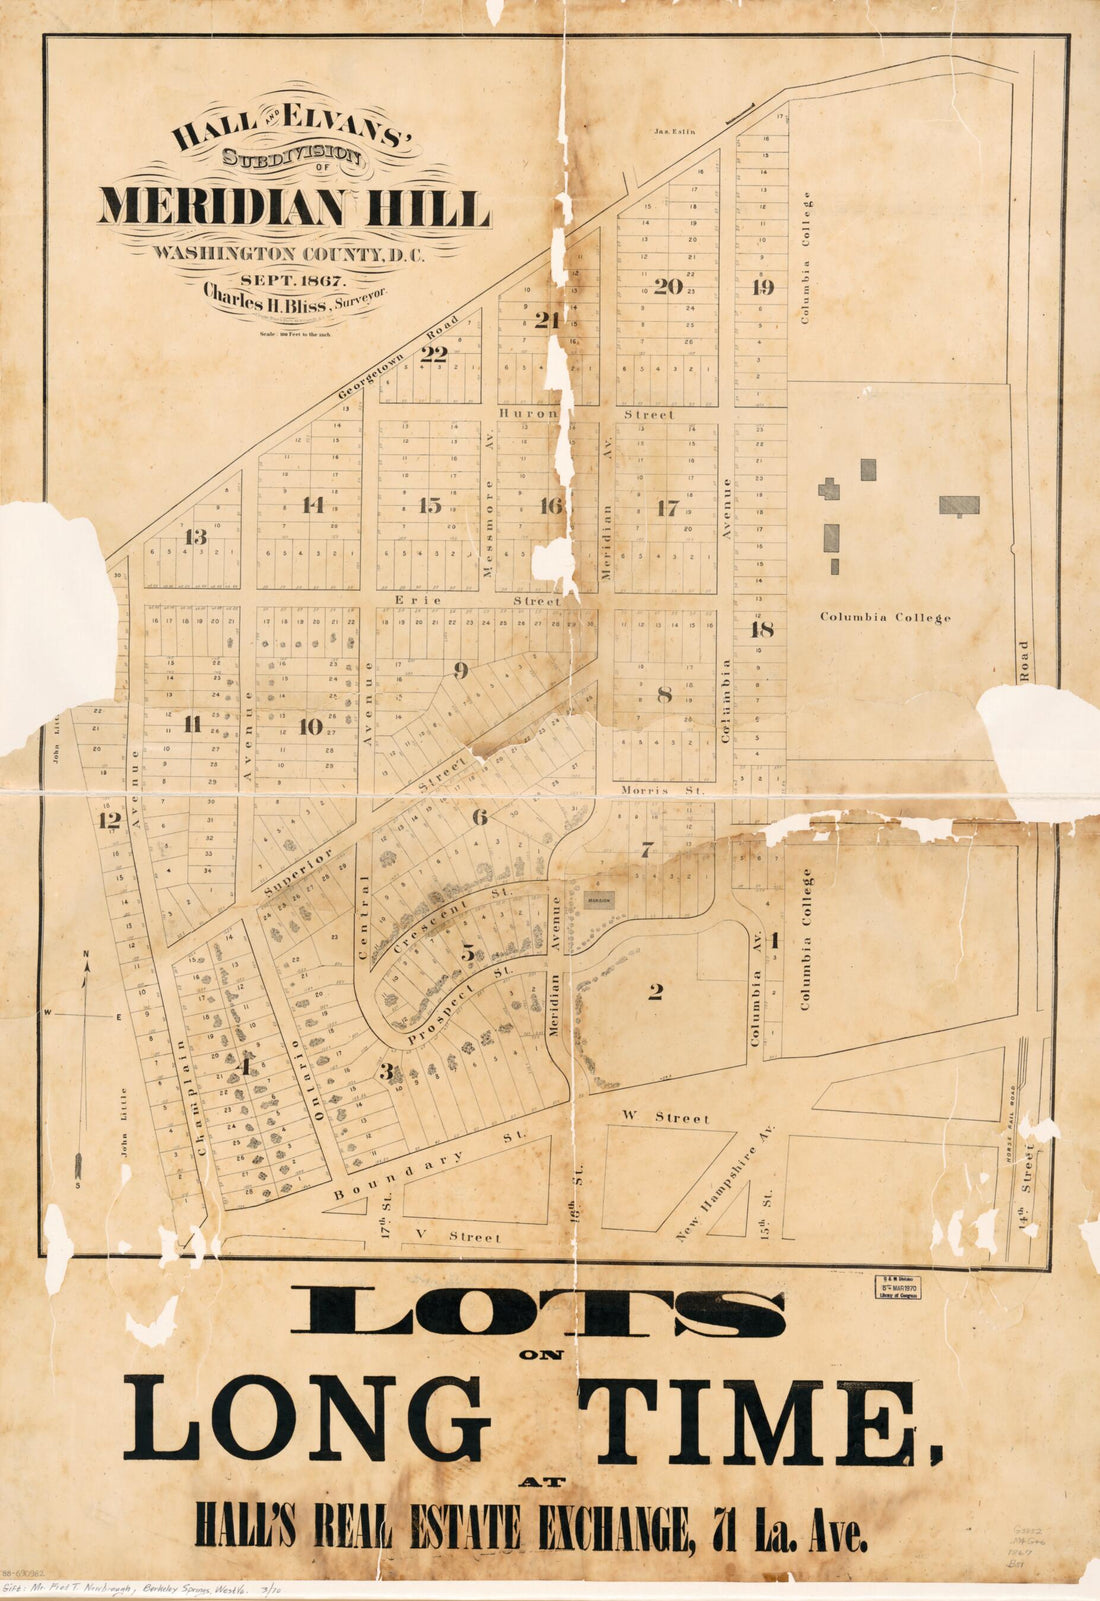 This old map of Hall and Elvans&